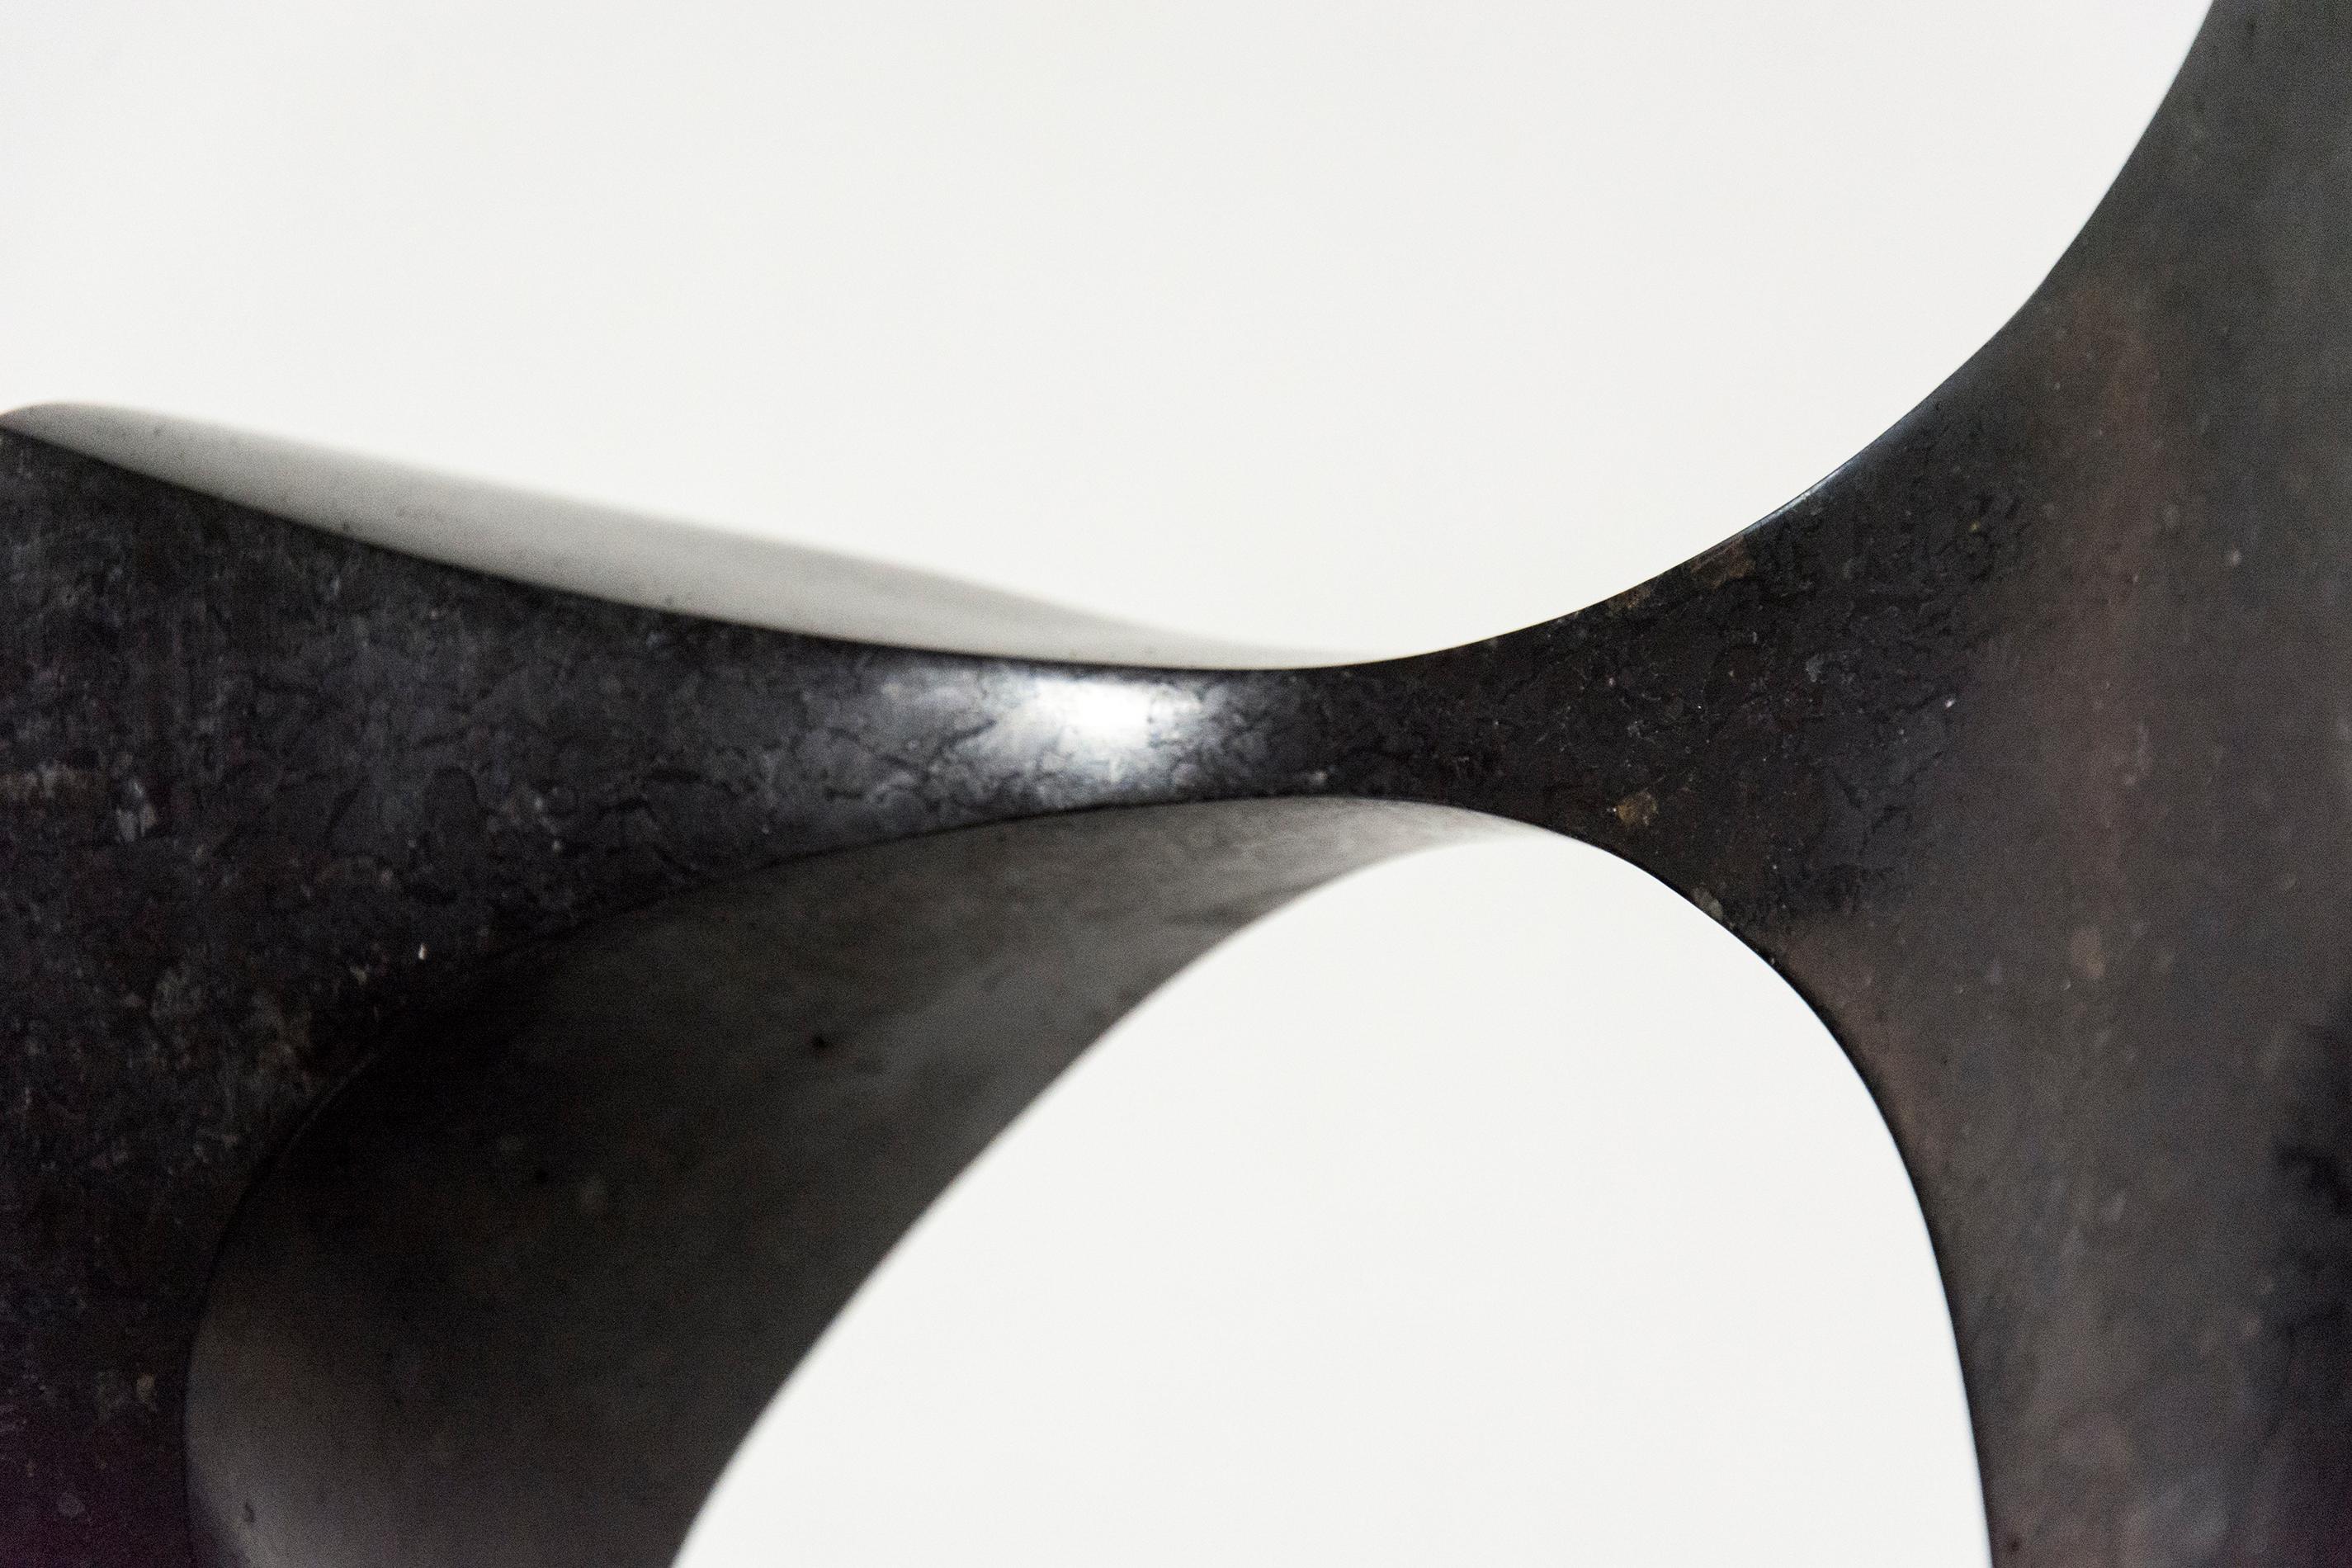 Smooth surfaced, engineered black granite is sculpted into an elegant figure eight by Jeremy Guy. The hour glass shaped work is aptly titled Halcyon which points to a period that is calm and idyllic. This sculpture work sits vertically without a